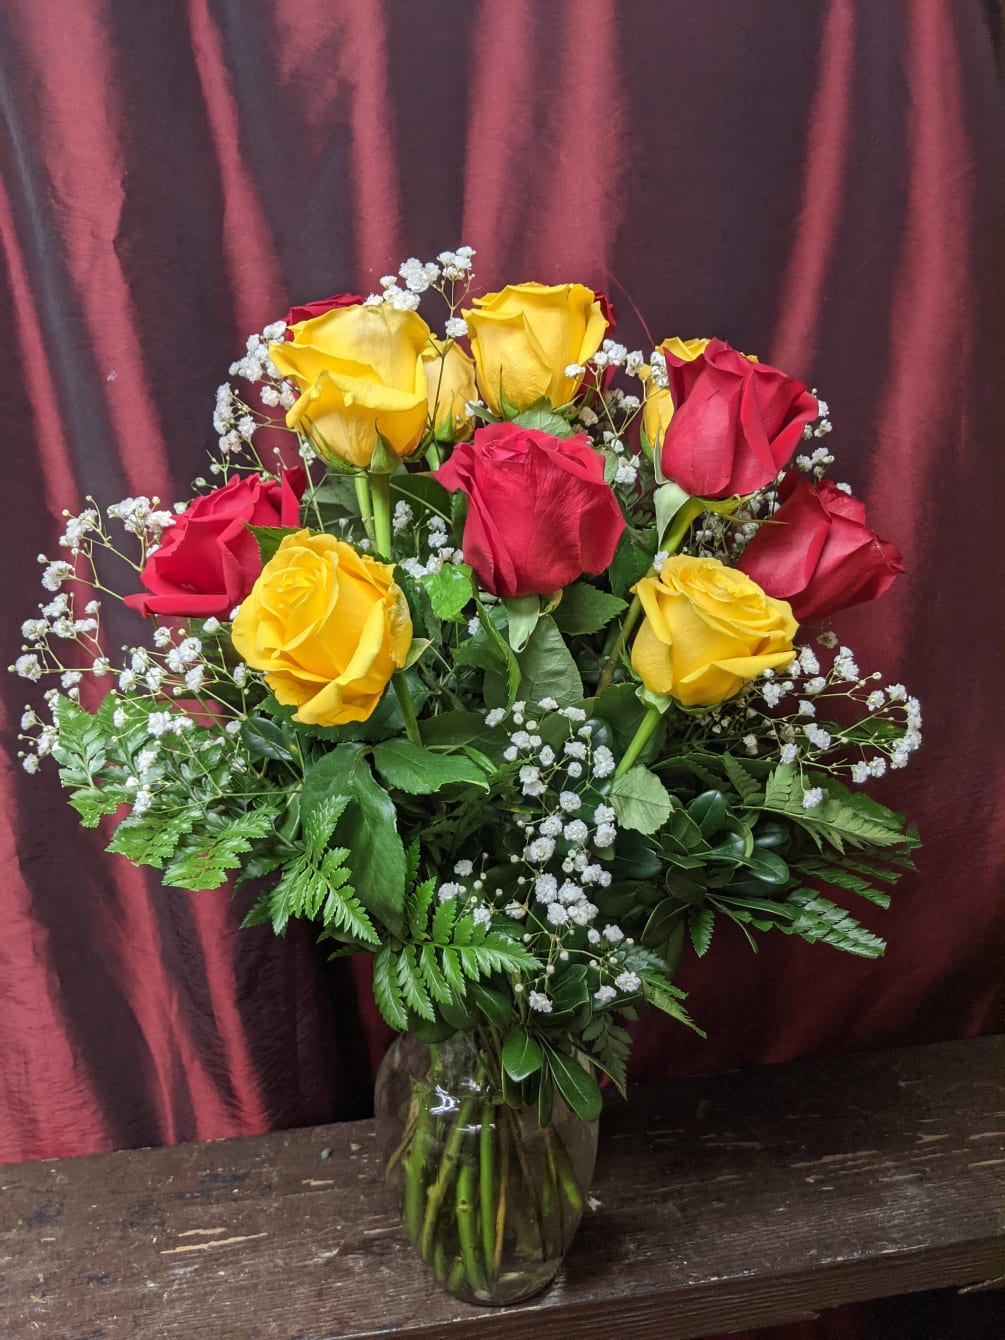 This bright and bold bouquet of long-stem roses radiates happy energy. The